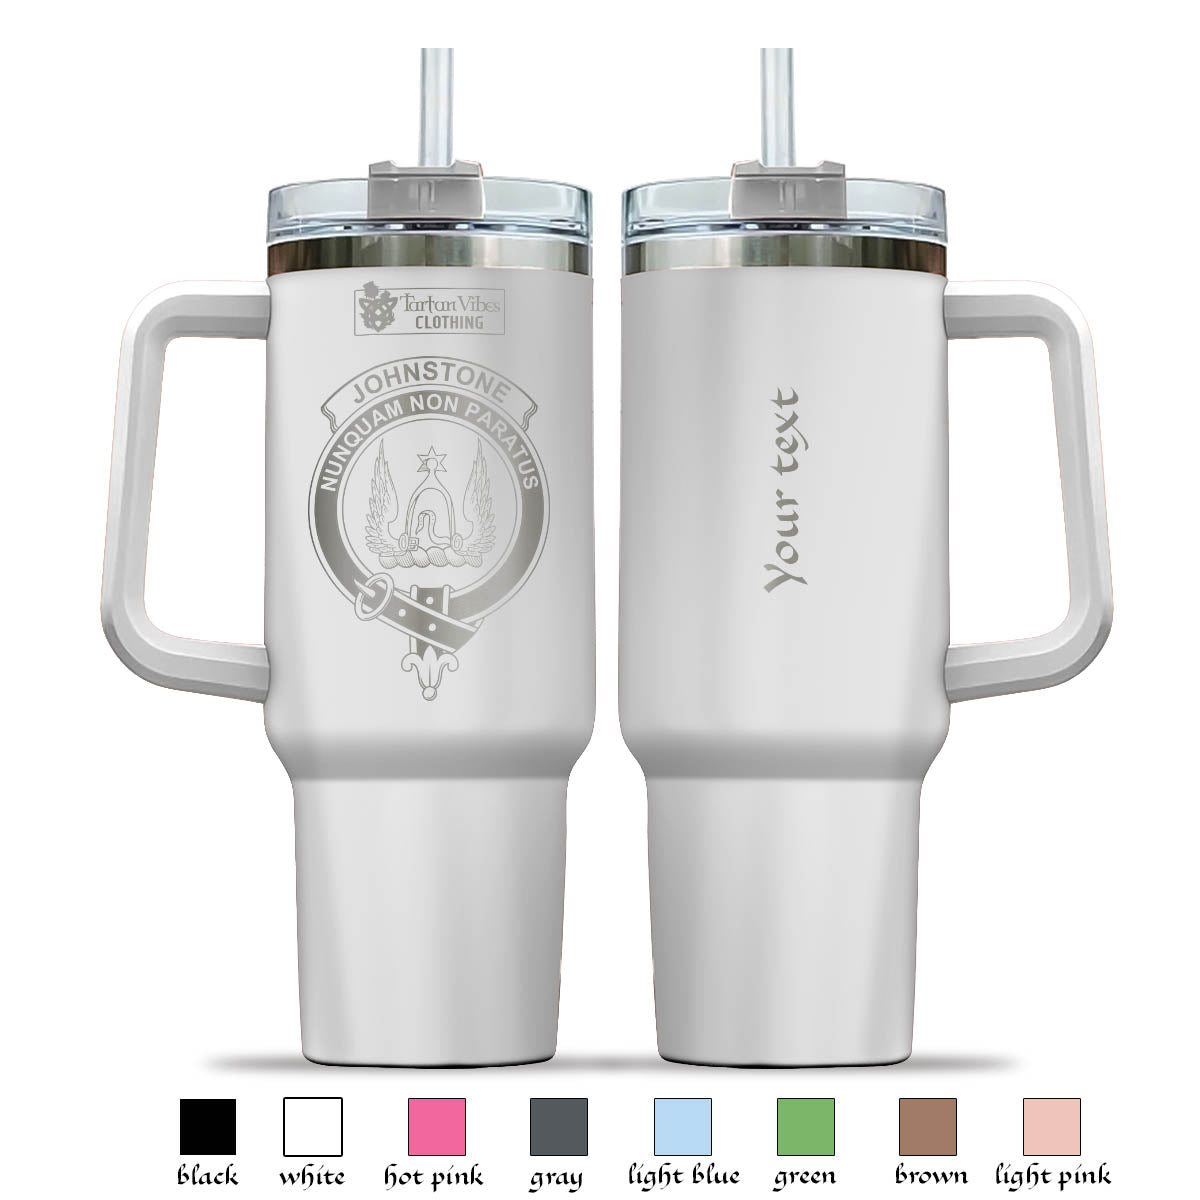 Tartan Vibes Clothing Johnstone Engraved Family Crest Tumbler with Handle